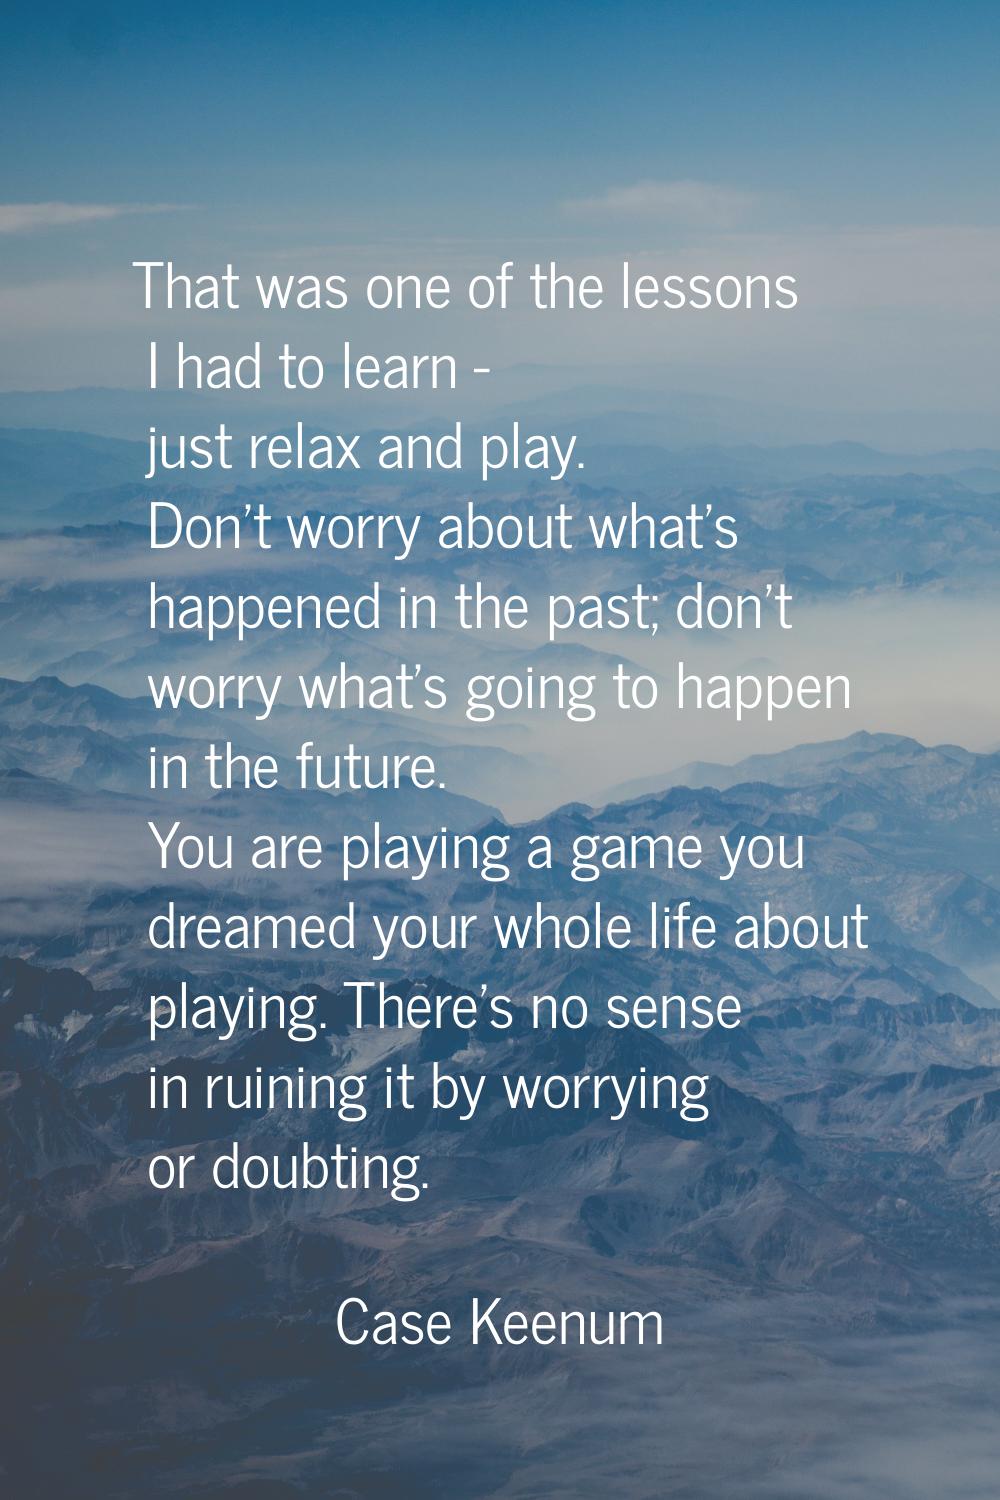 That was one of the lessons I had to learn - just relax and play. Don't worry about what's happened